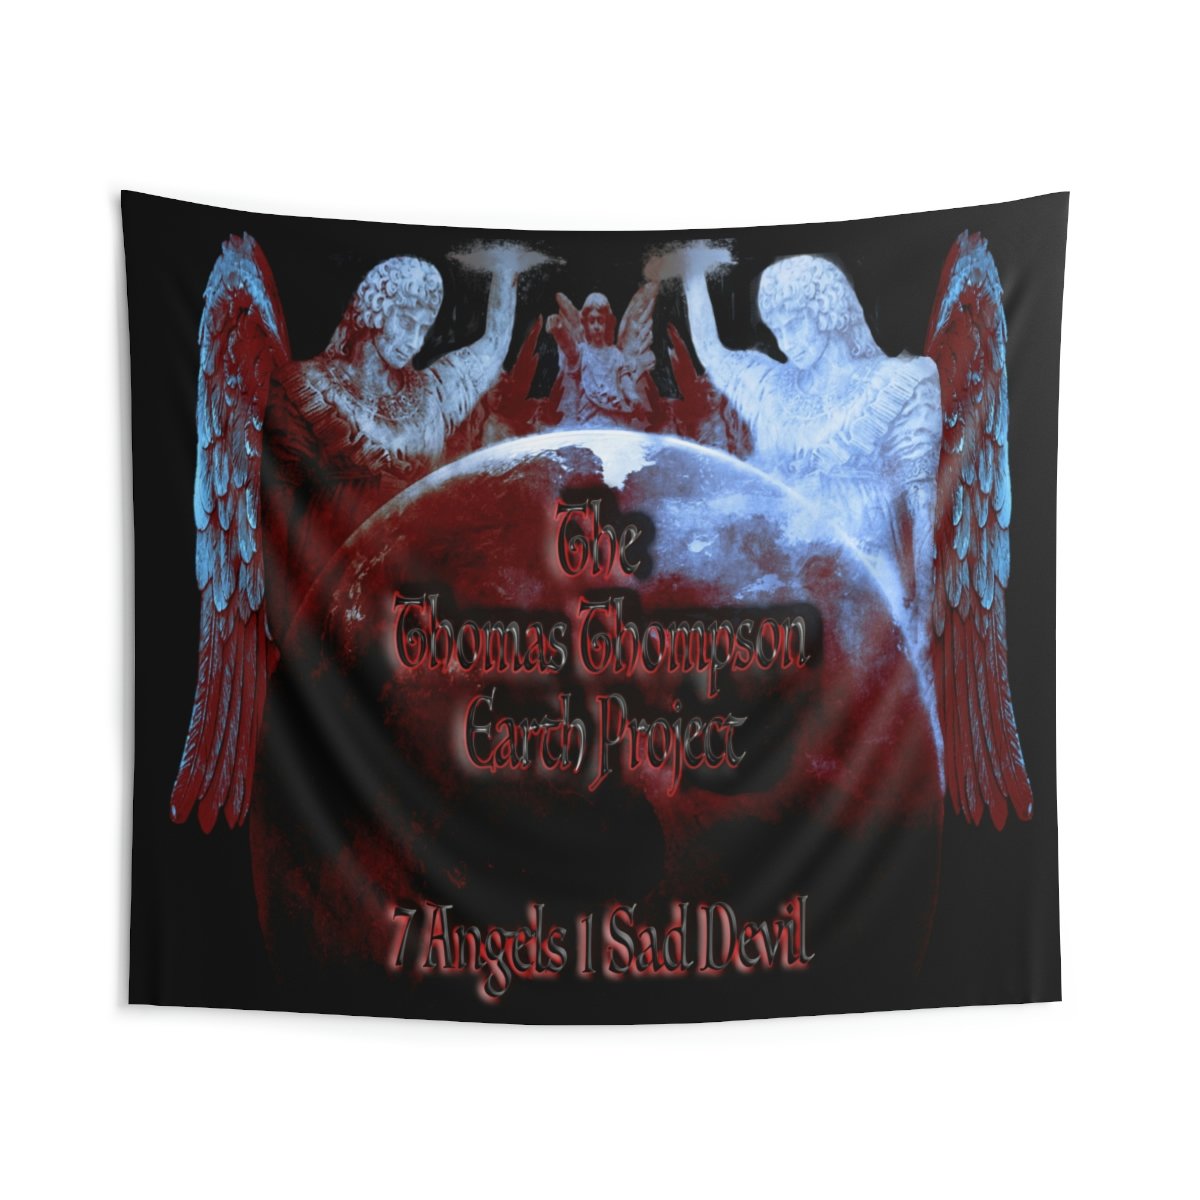 The Thomas Thompson Earth Project 7 Angels Indoor Wall Tapestries